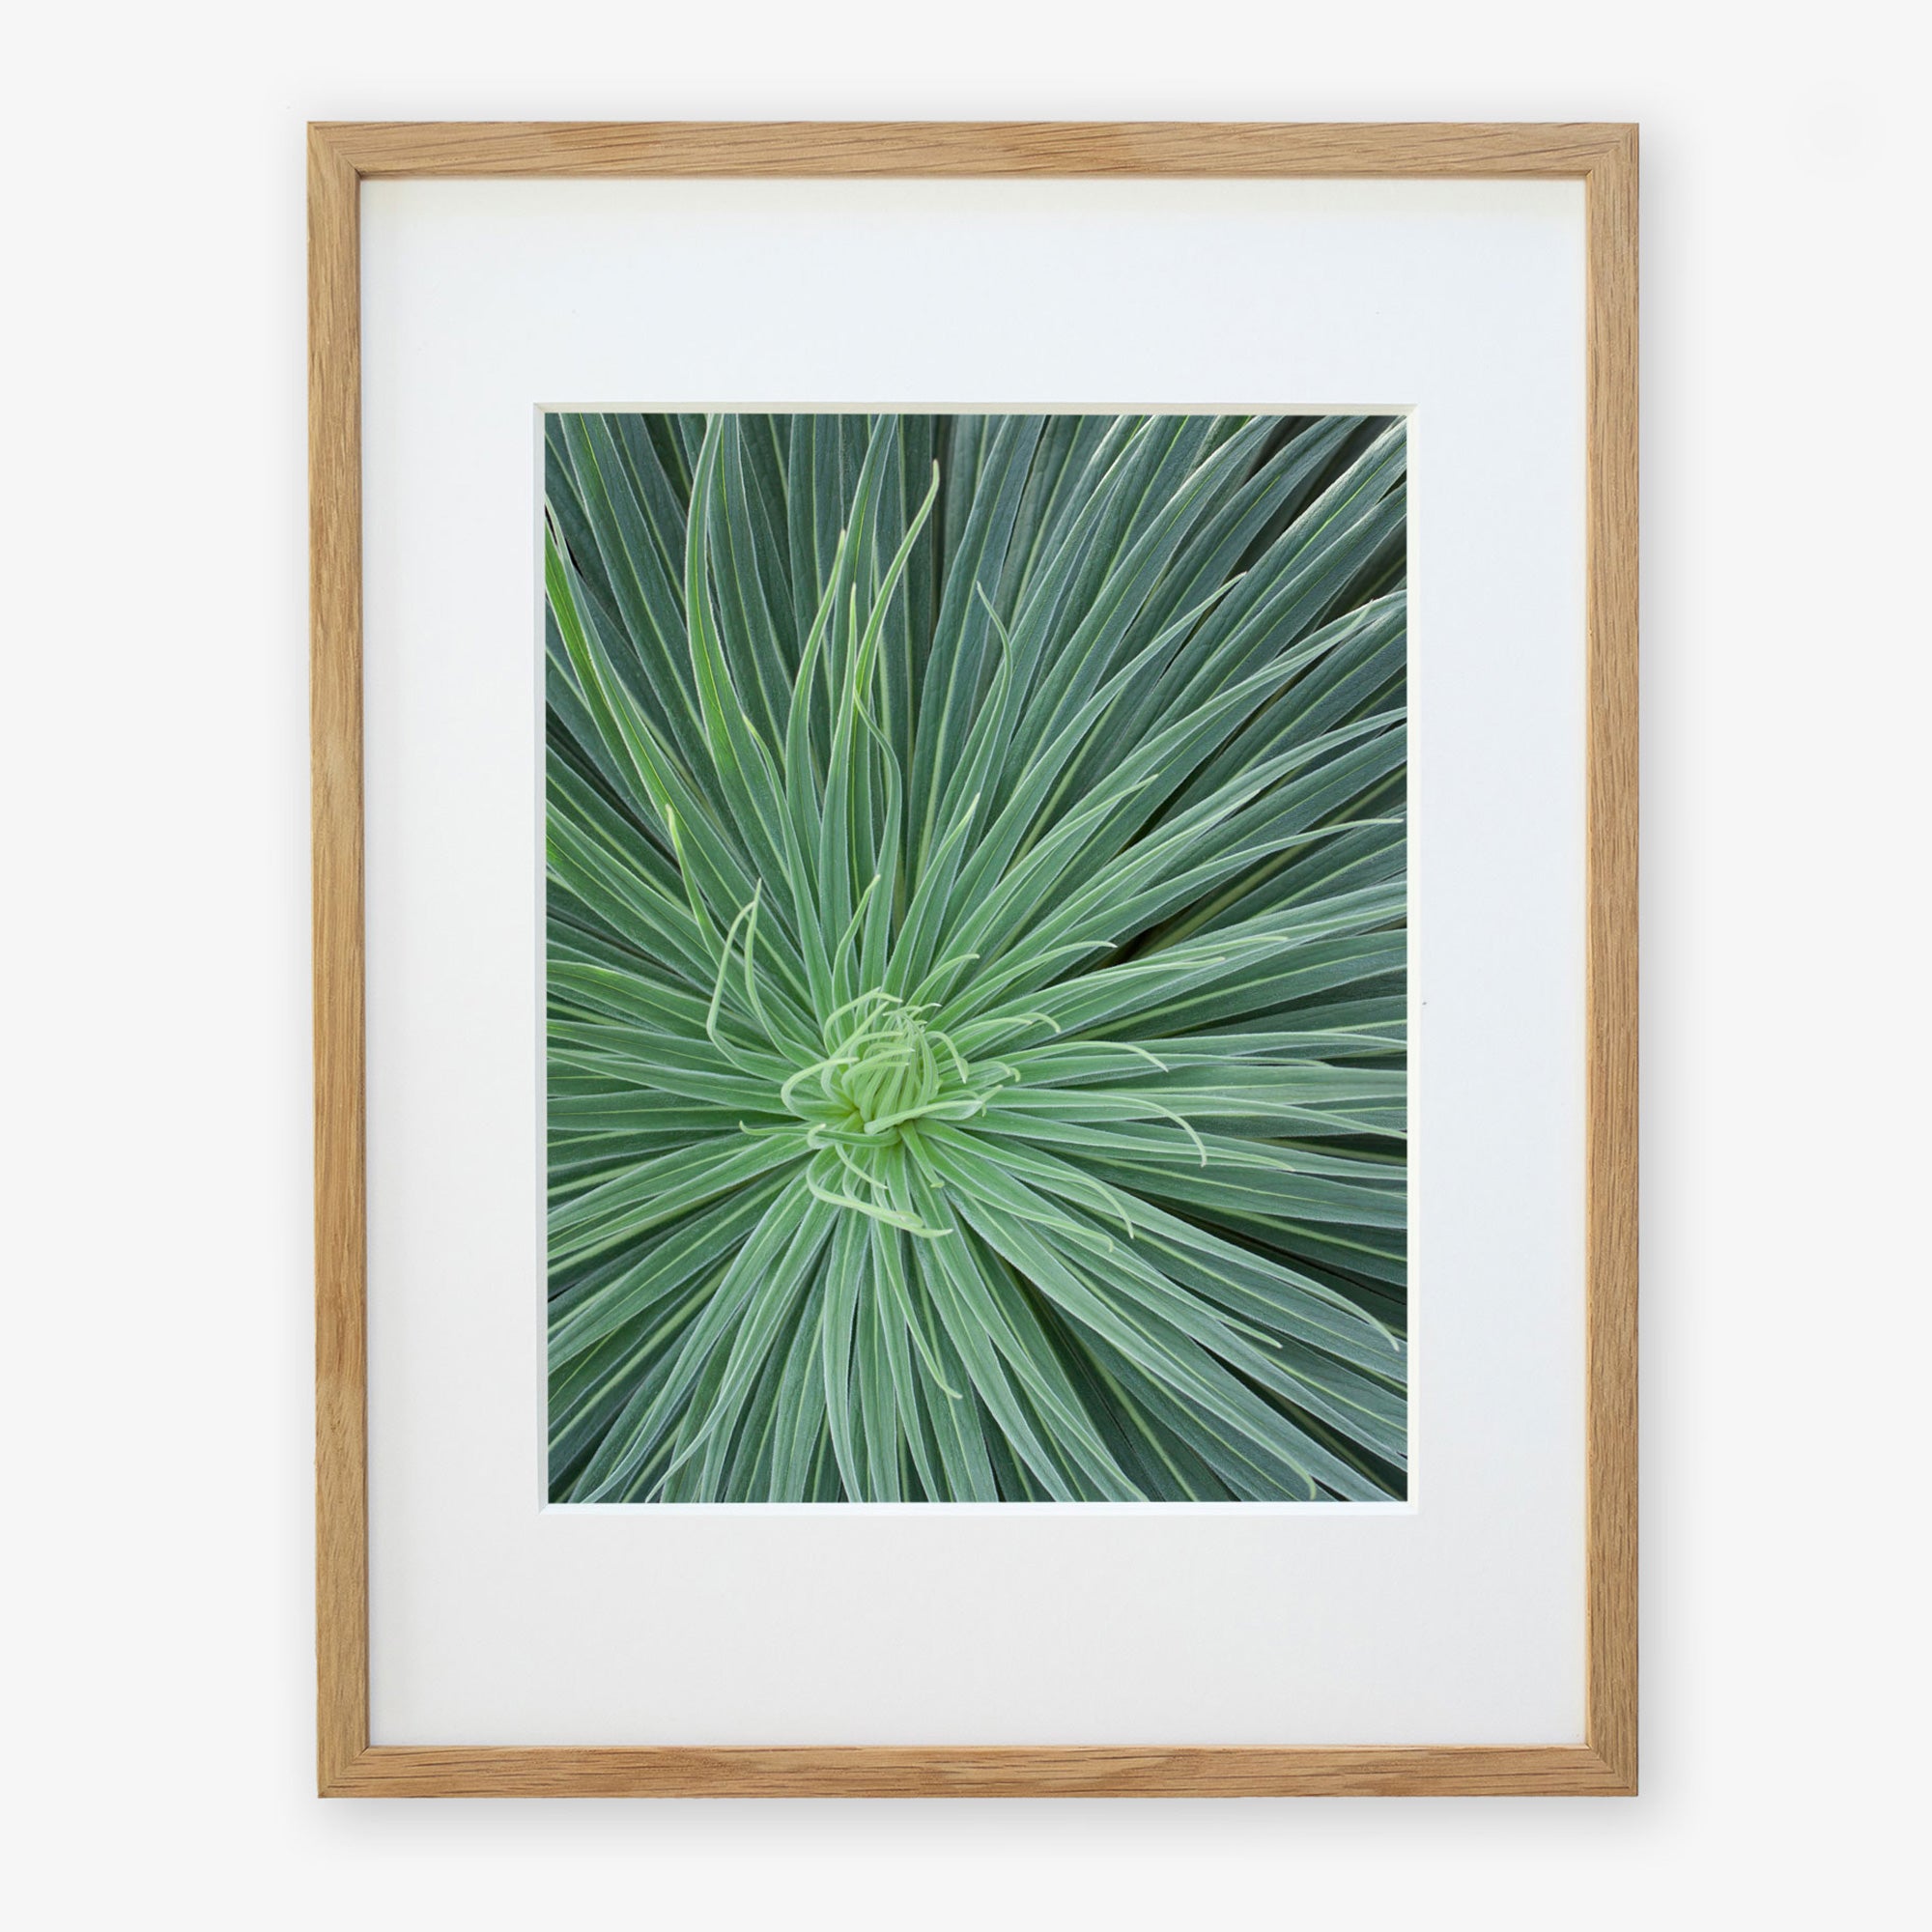 A framed photograph of the Offley Green 'Desert Fireworks II' green succulent desert plant with long, thin leaves radiating from the center, displayed against a white background within a light wooden frame.